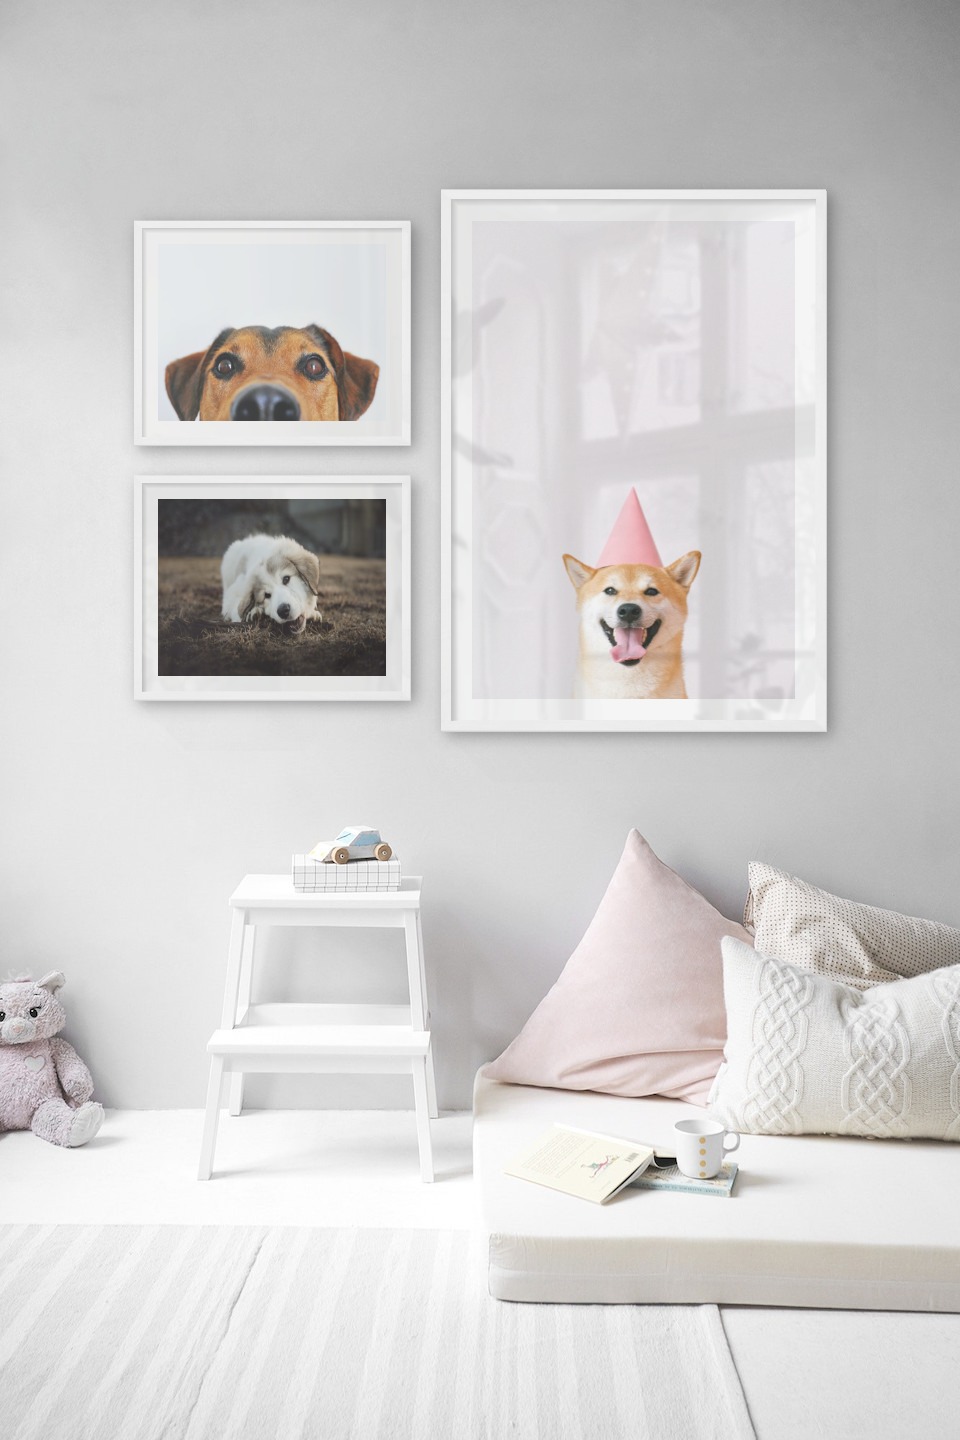 Gallery wall with picture frames in white in sizes 40x50 and 70x100 with prints "Hundnos", "Dog chewing" and "Dog with pink hat"